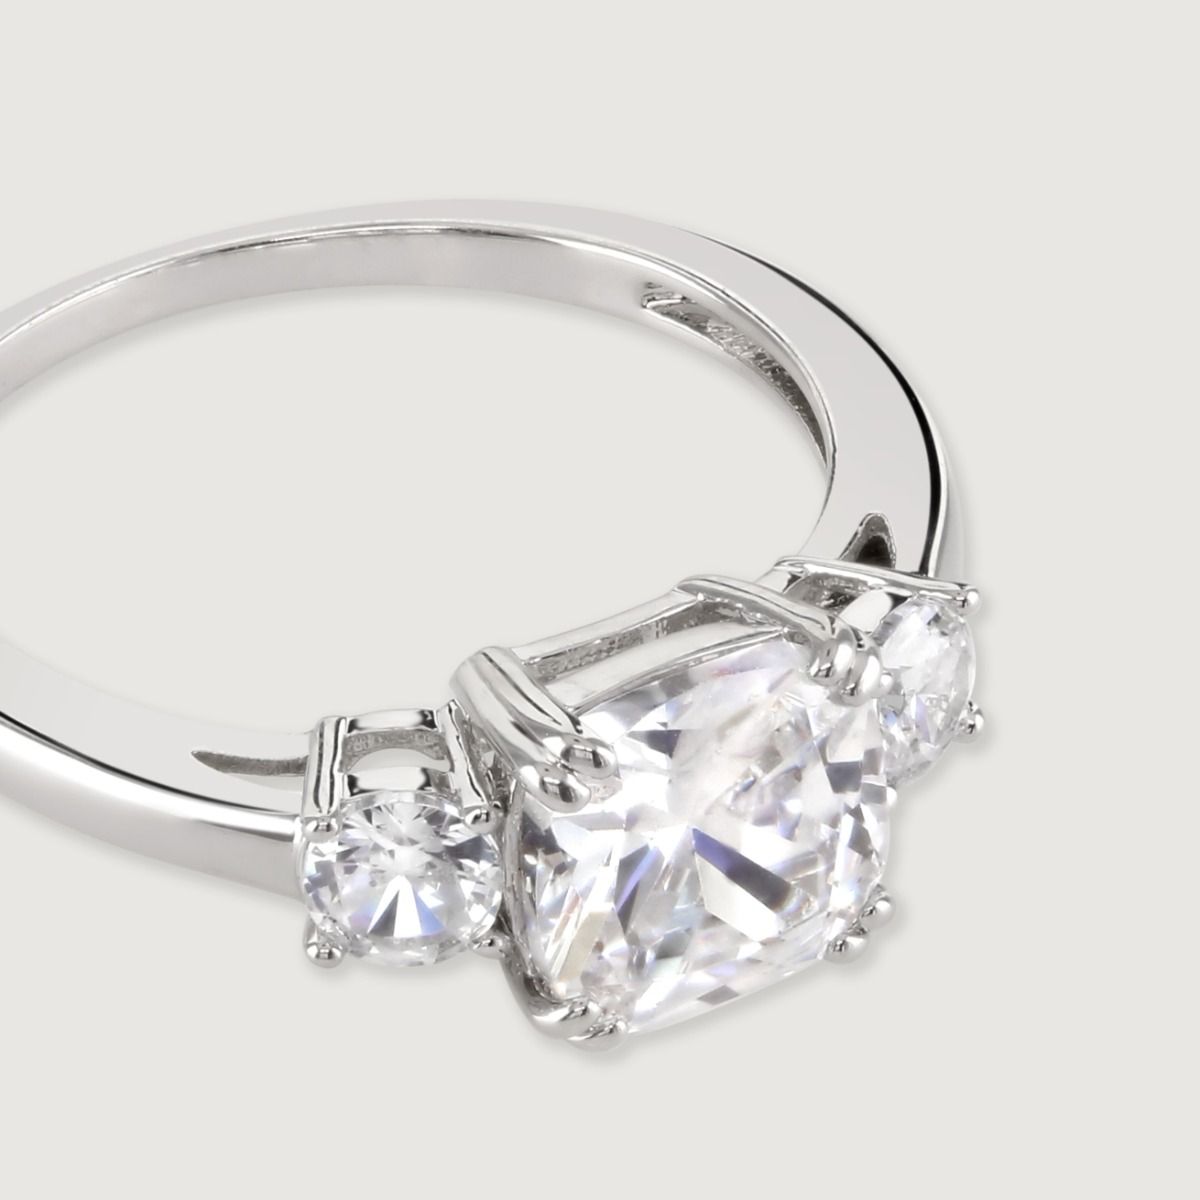 A truly dazzling design, this stunning ring features an emerald cut cubic zirconia centre stone between two smaller  brilliant cut clear cubic zirconia stones. 